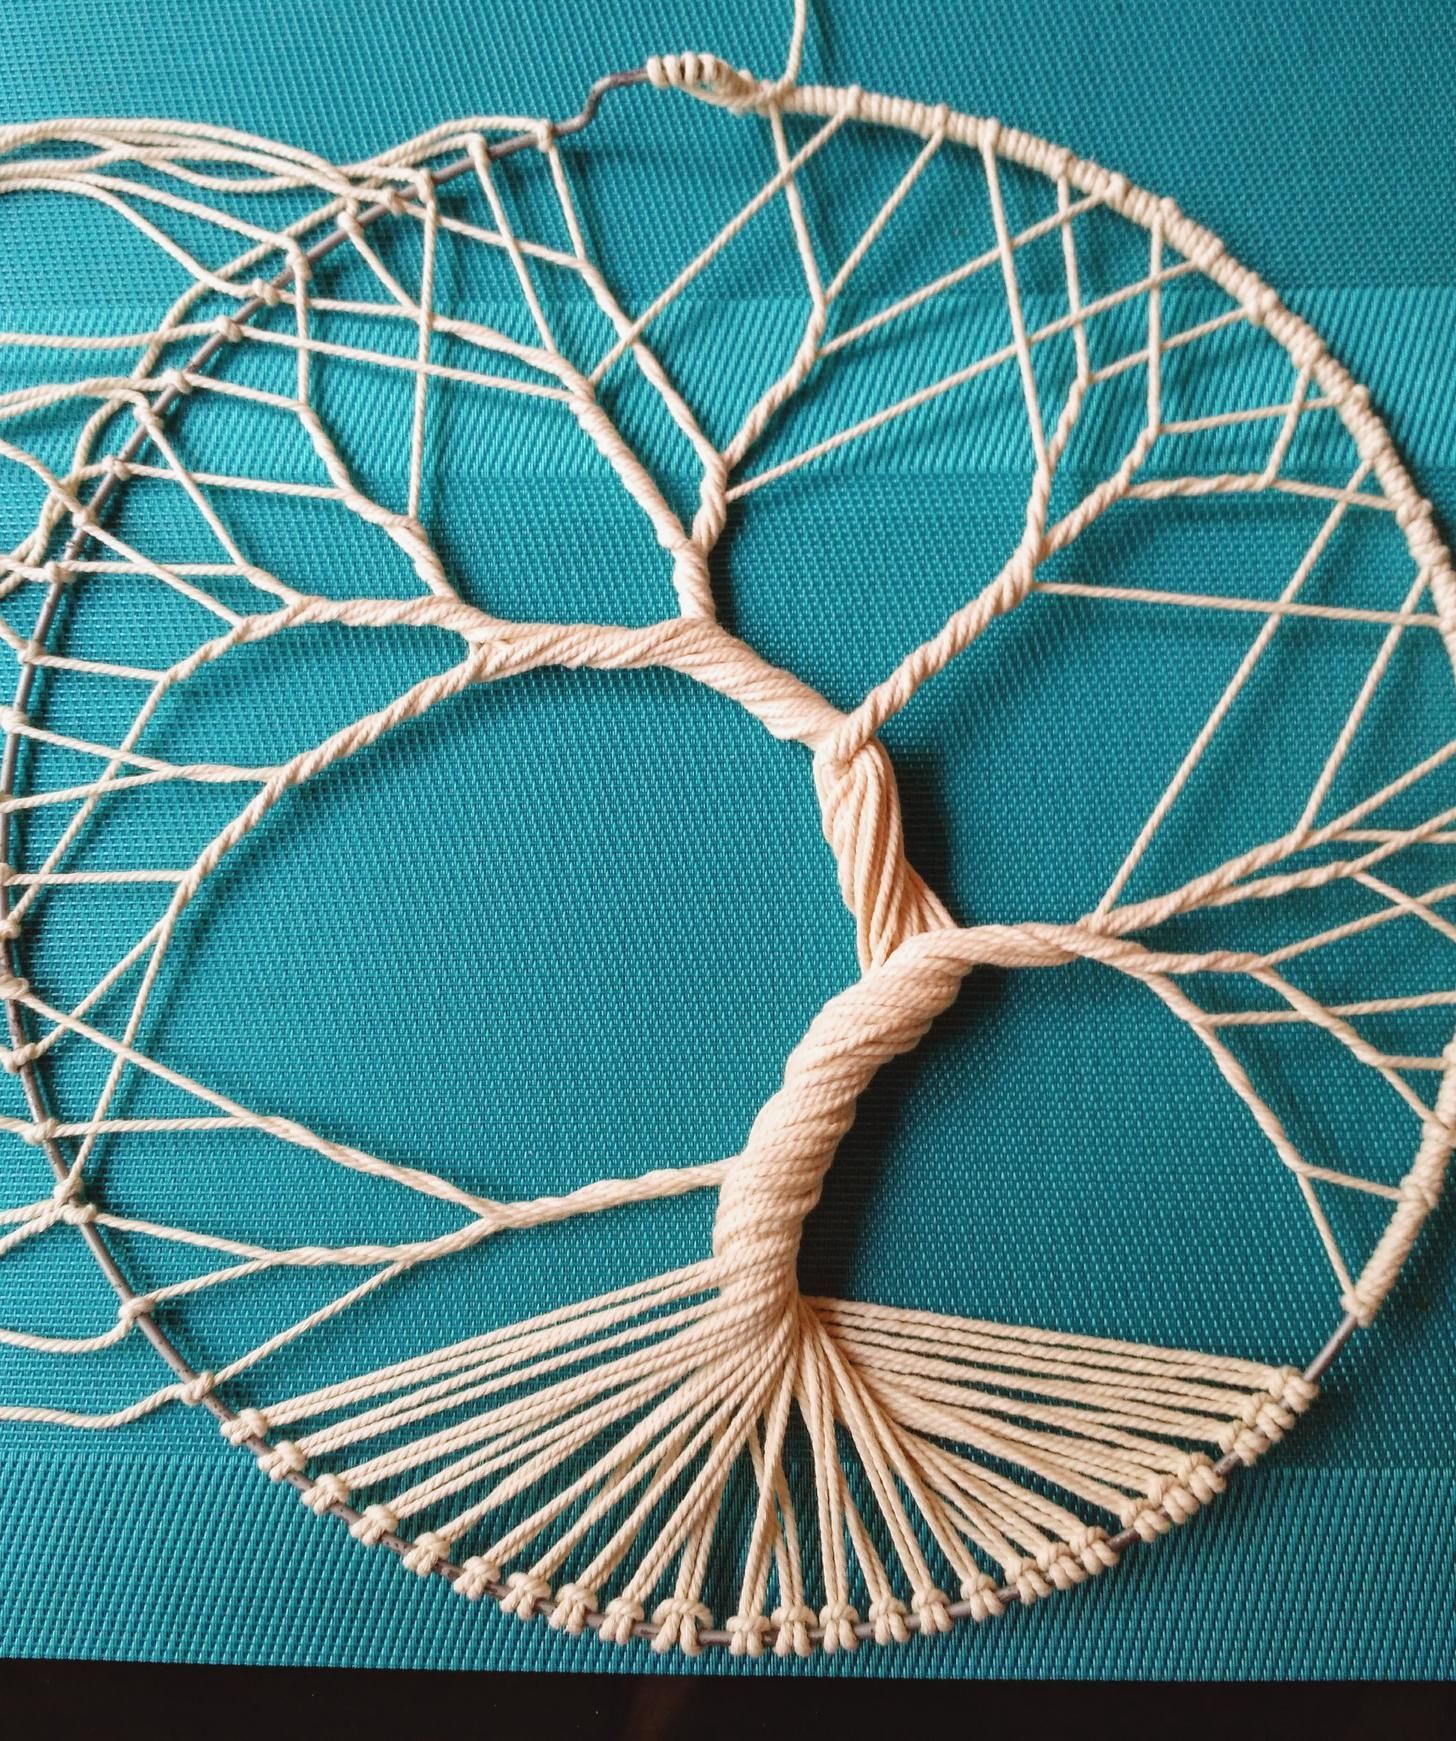 How to make a Tree of Life with rope - How to make a Tree of Life with rope -   19 diy Dream Catcher tree of life ideas